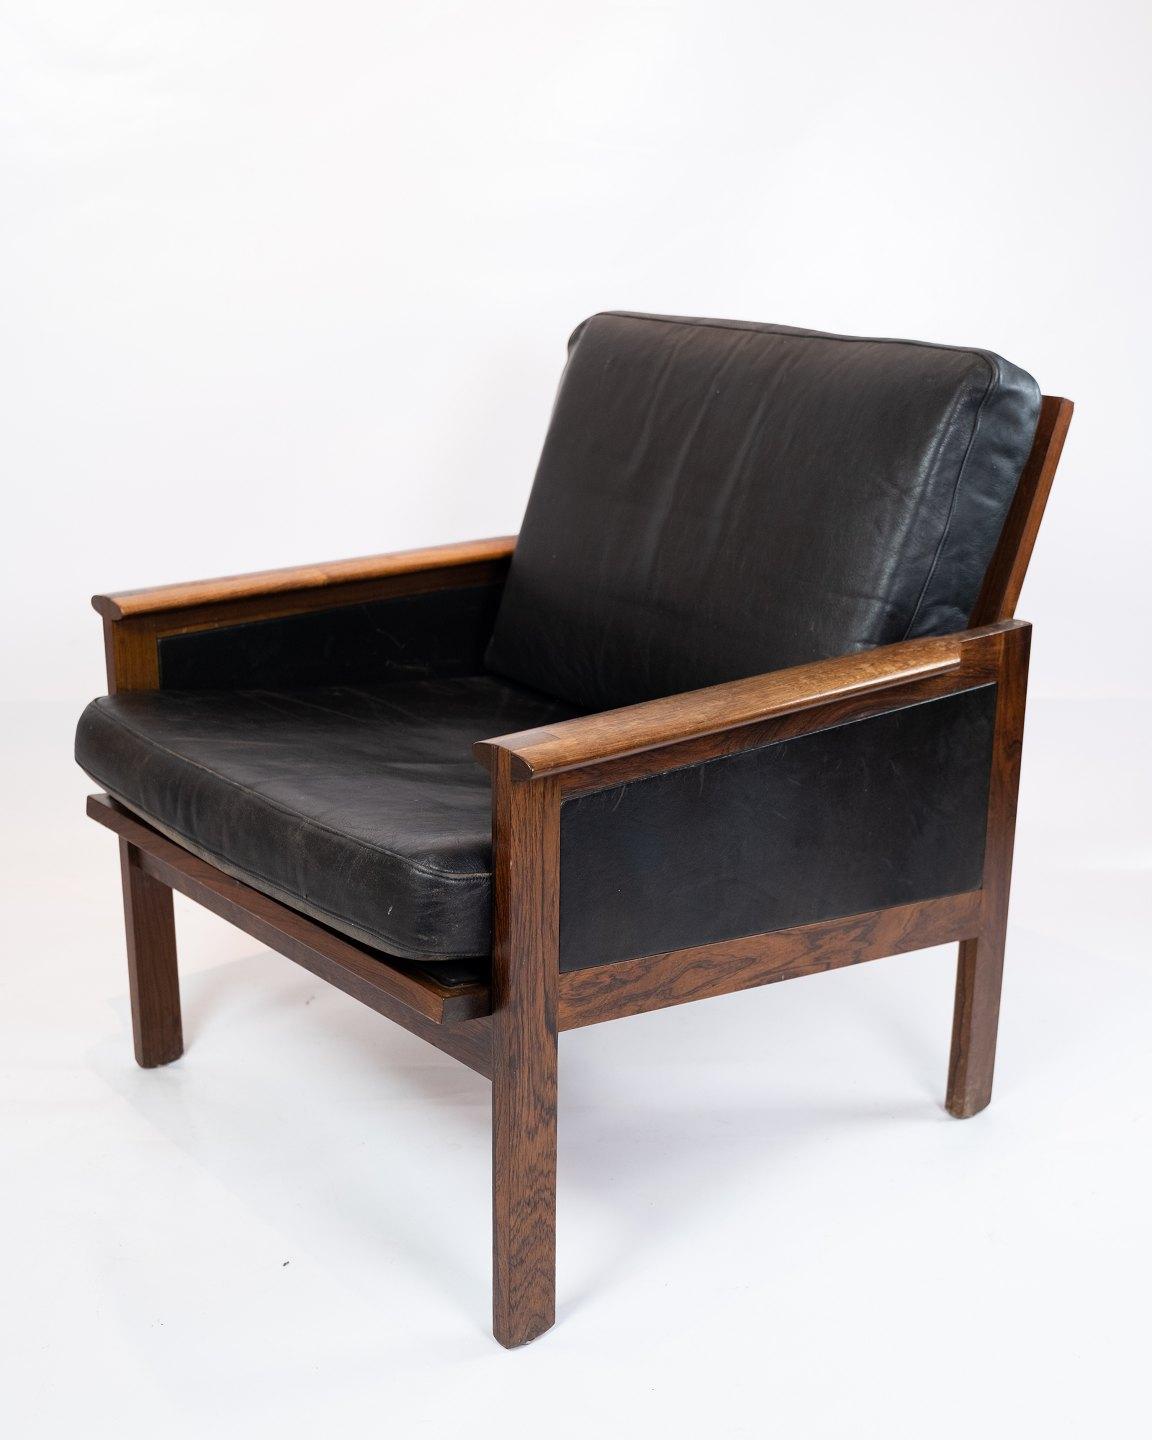 A pair of armchairs, model Capella, in rosewood and black elegance leather designed by Illum Wikkelsø from the 1960s. The pair is in great vintage condition.
 
This product will be inspected thoroughly at our professional workshop by our educated